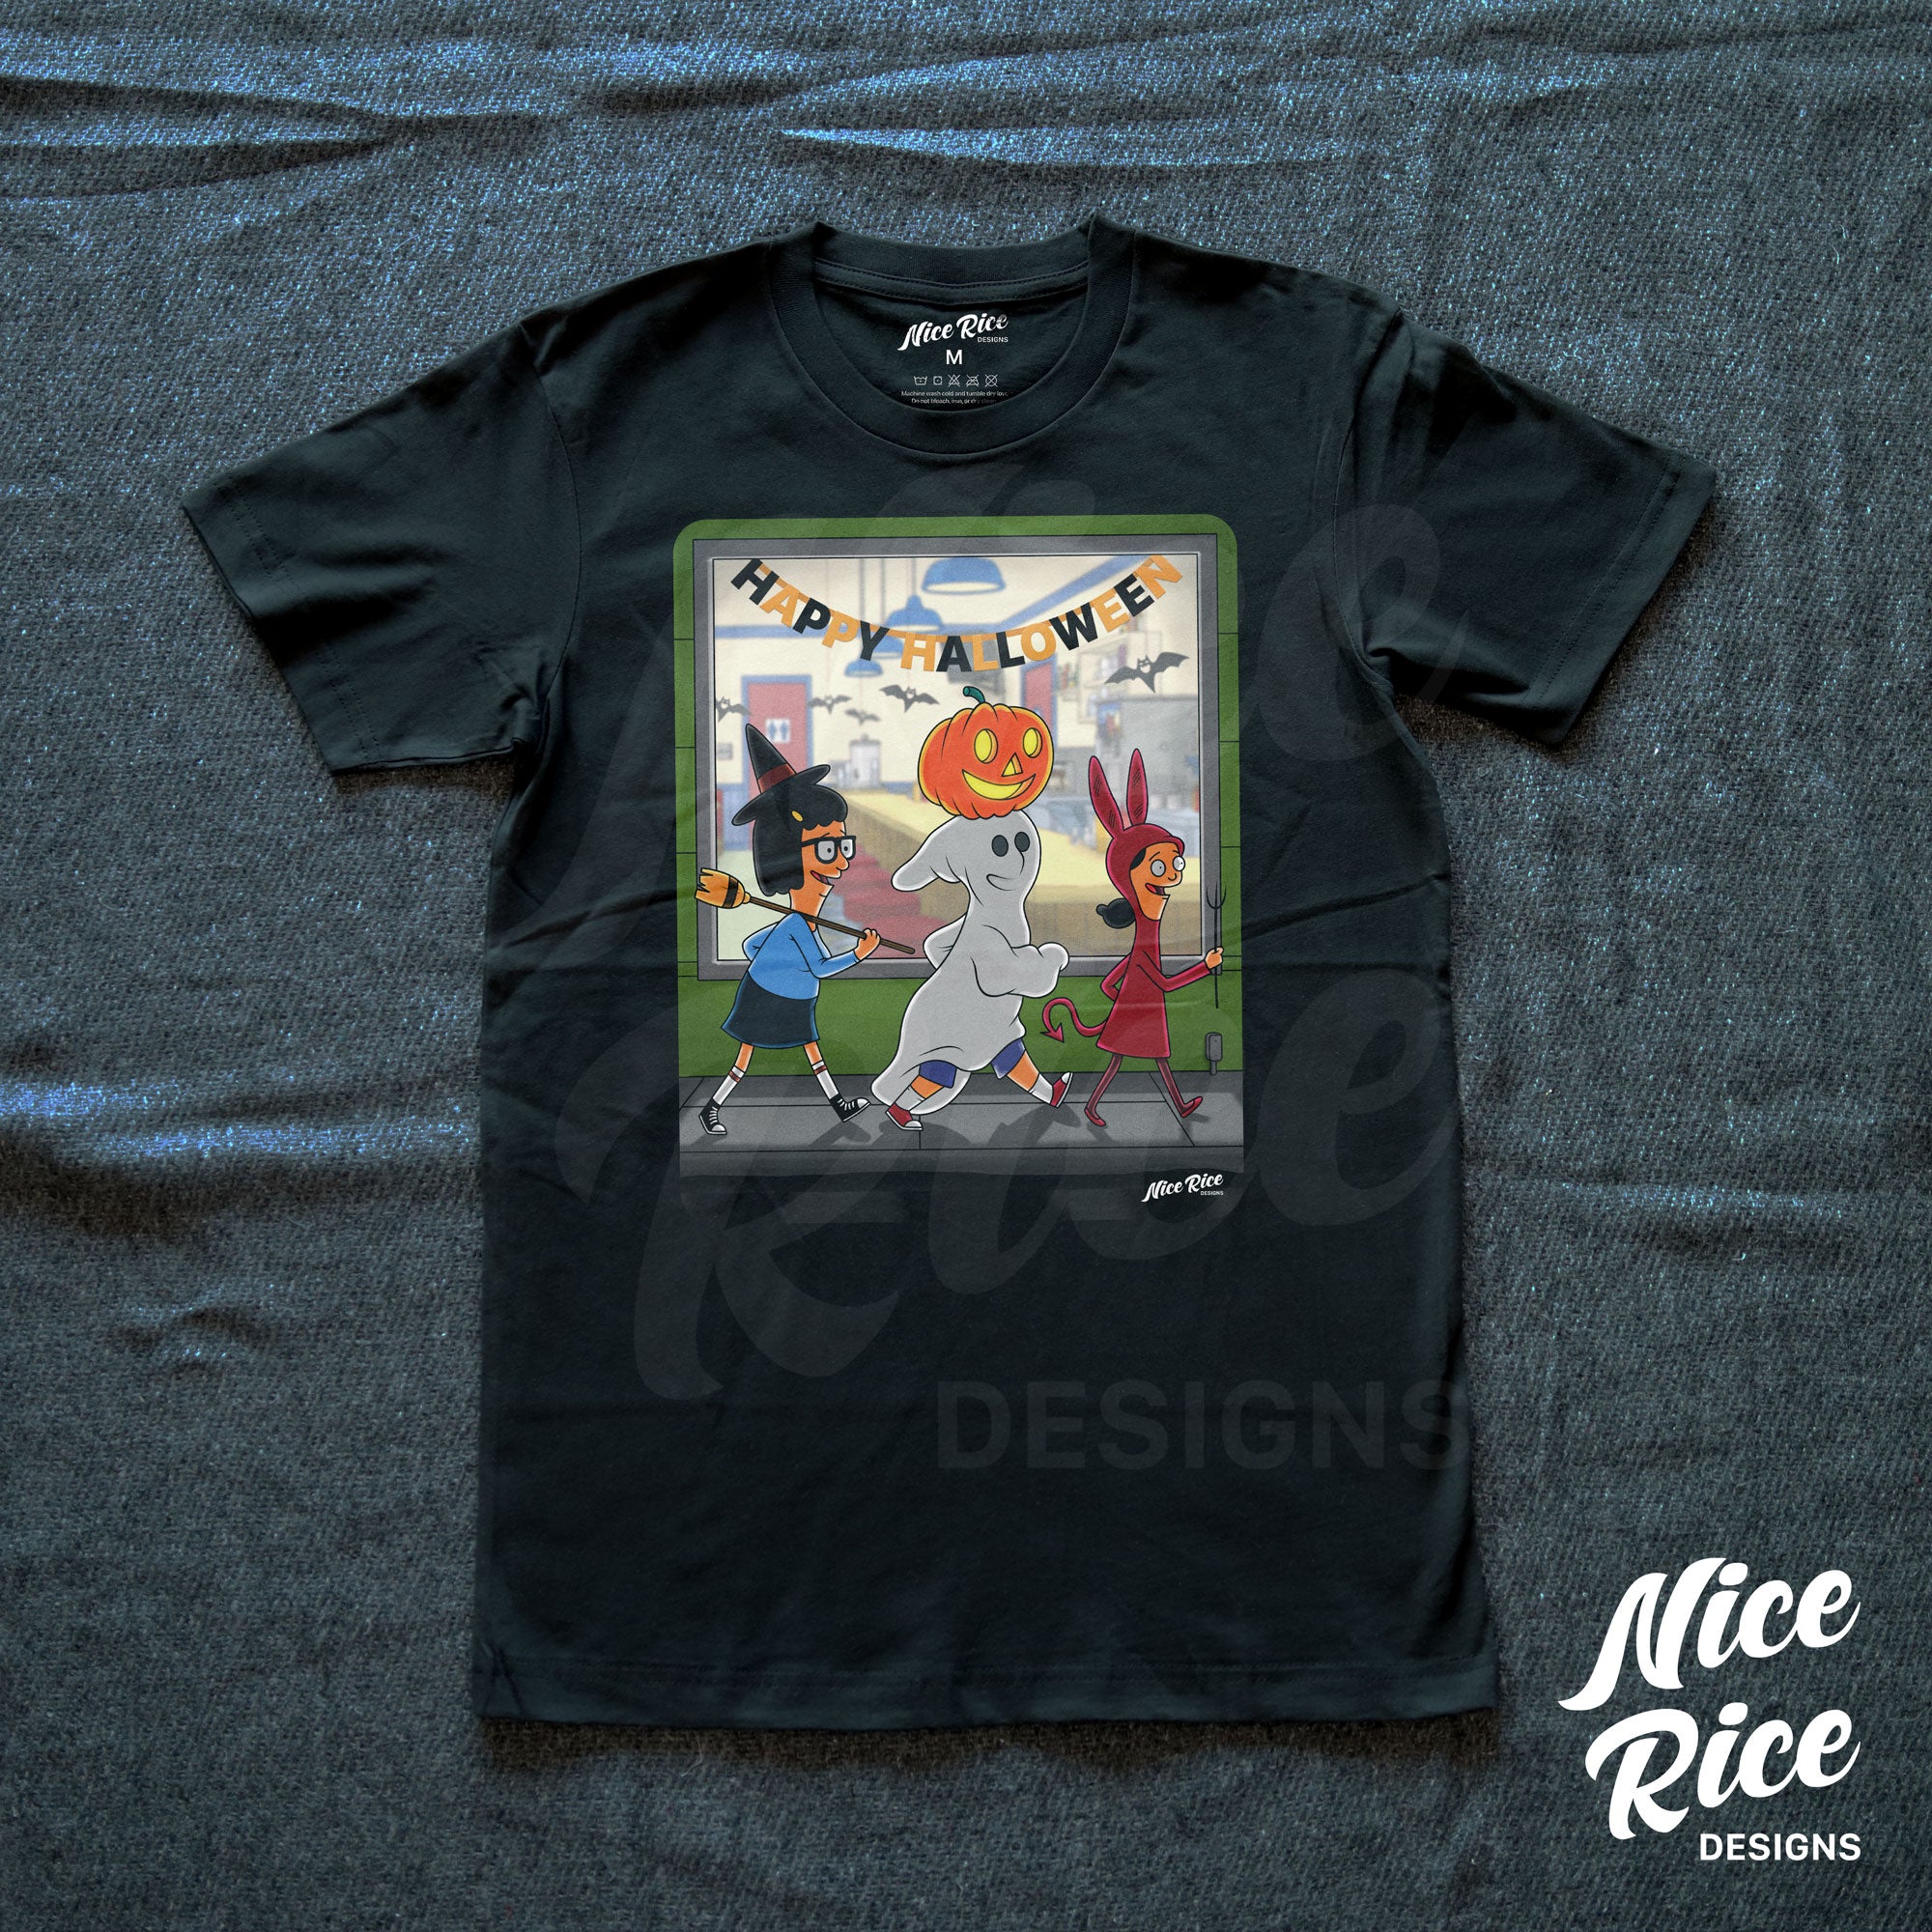 Trick or Treat Shirt by Nice Rice Designs